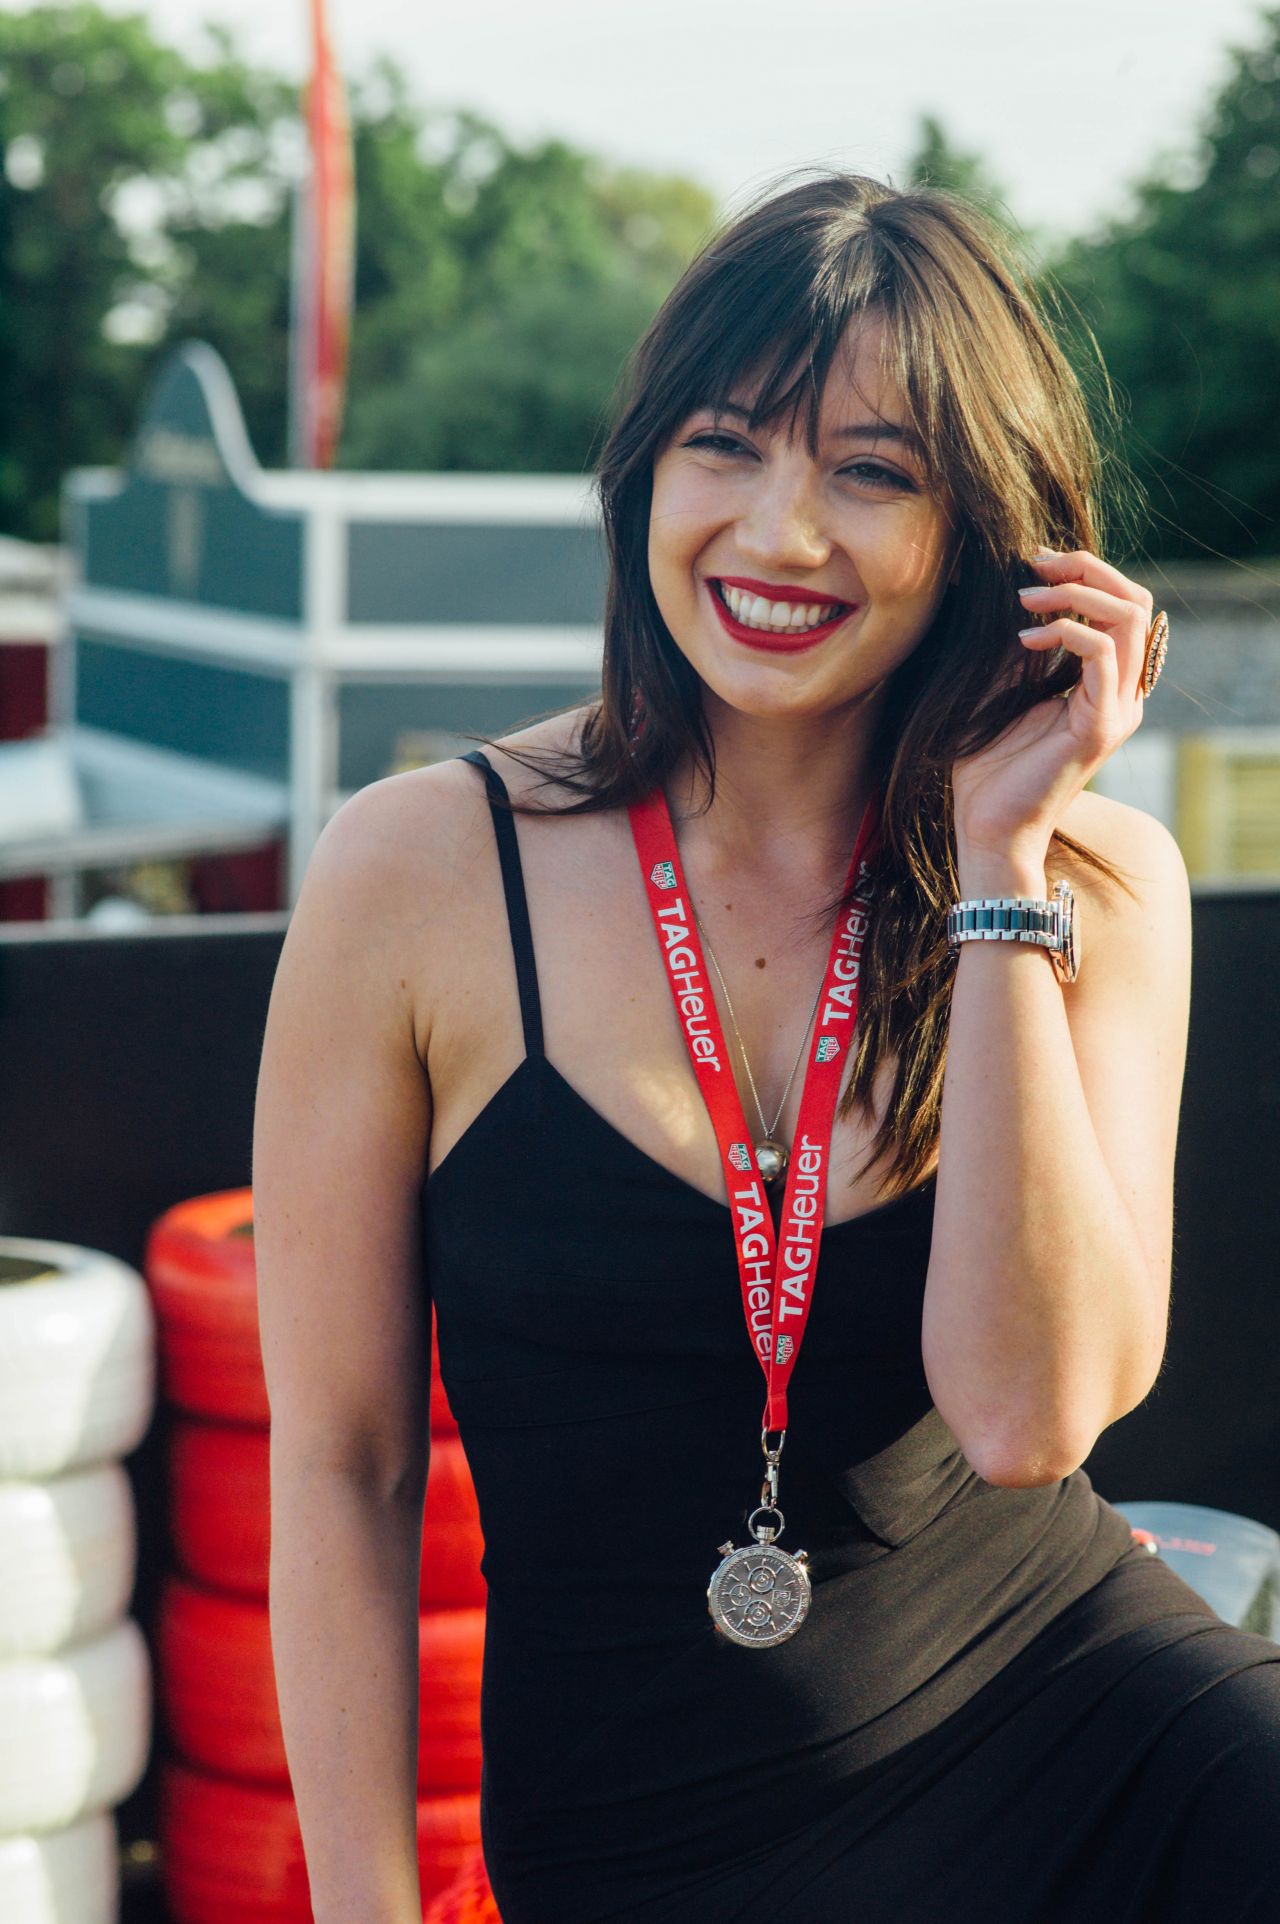 Daisy Lowe at 2015 Goodwood Festival of Speed in Chichester, England ...